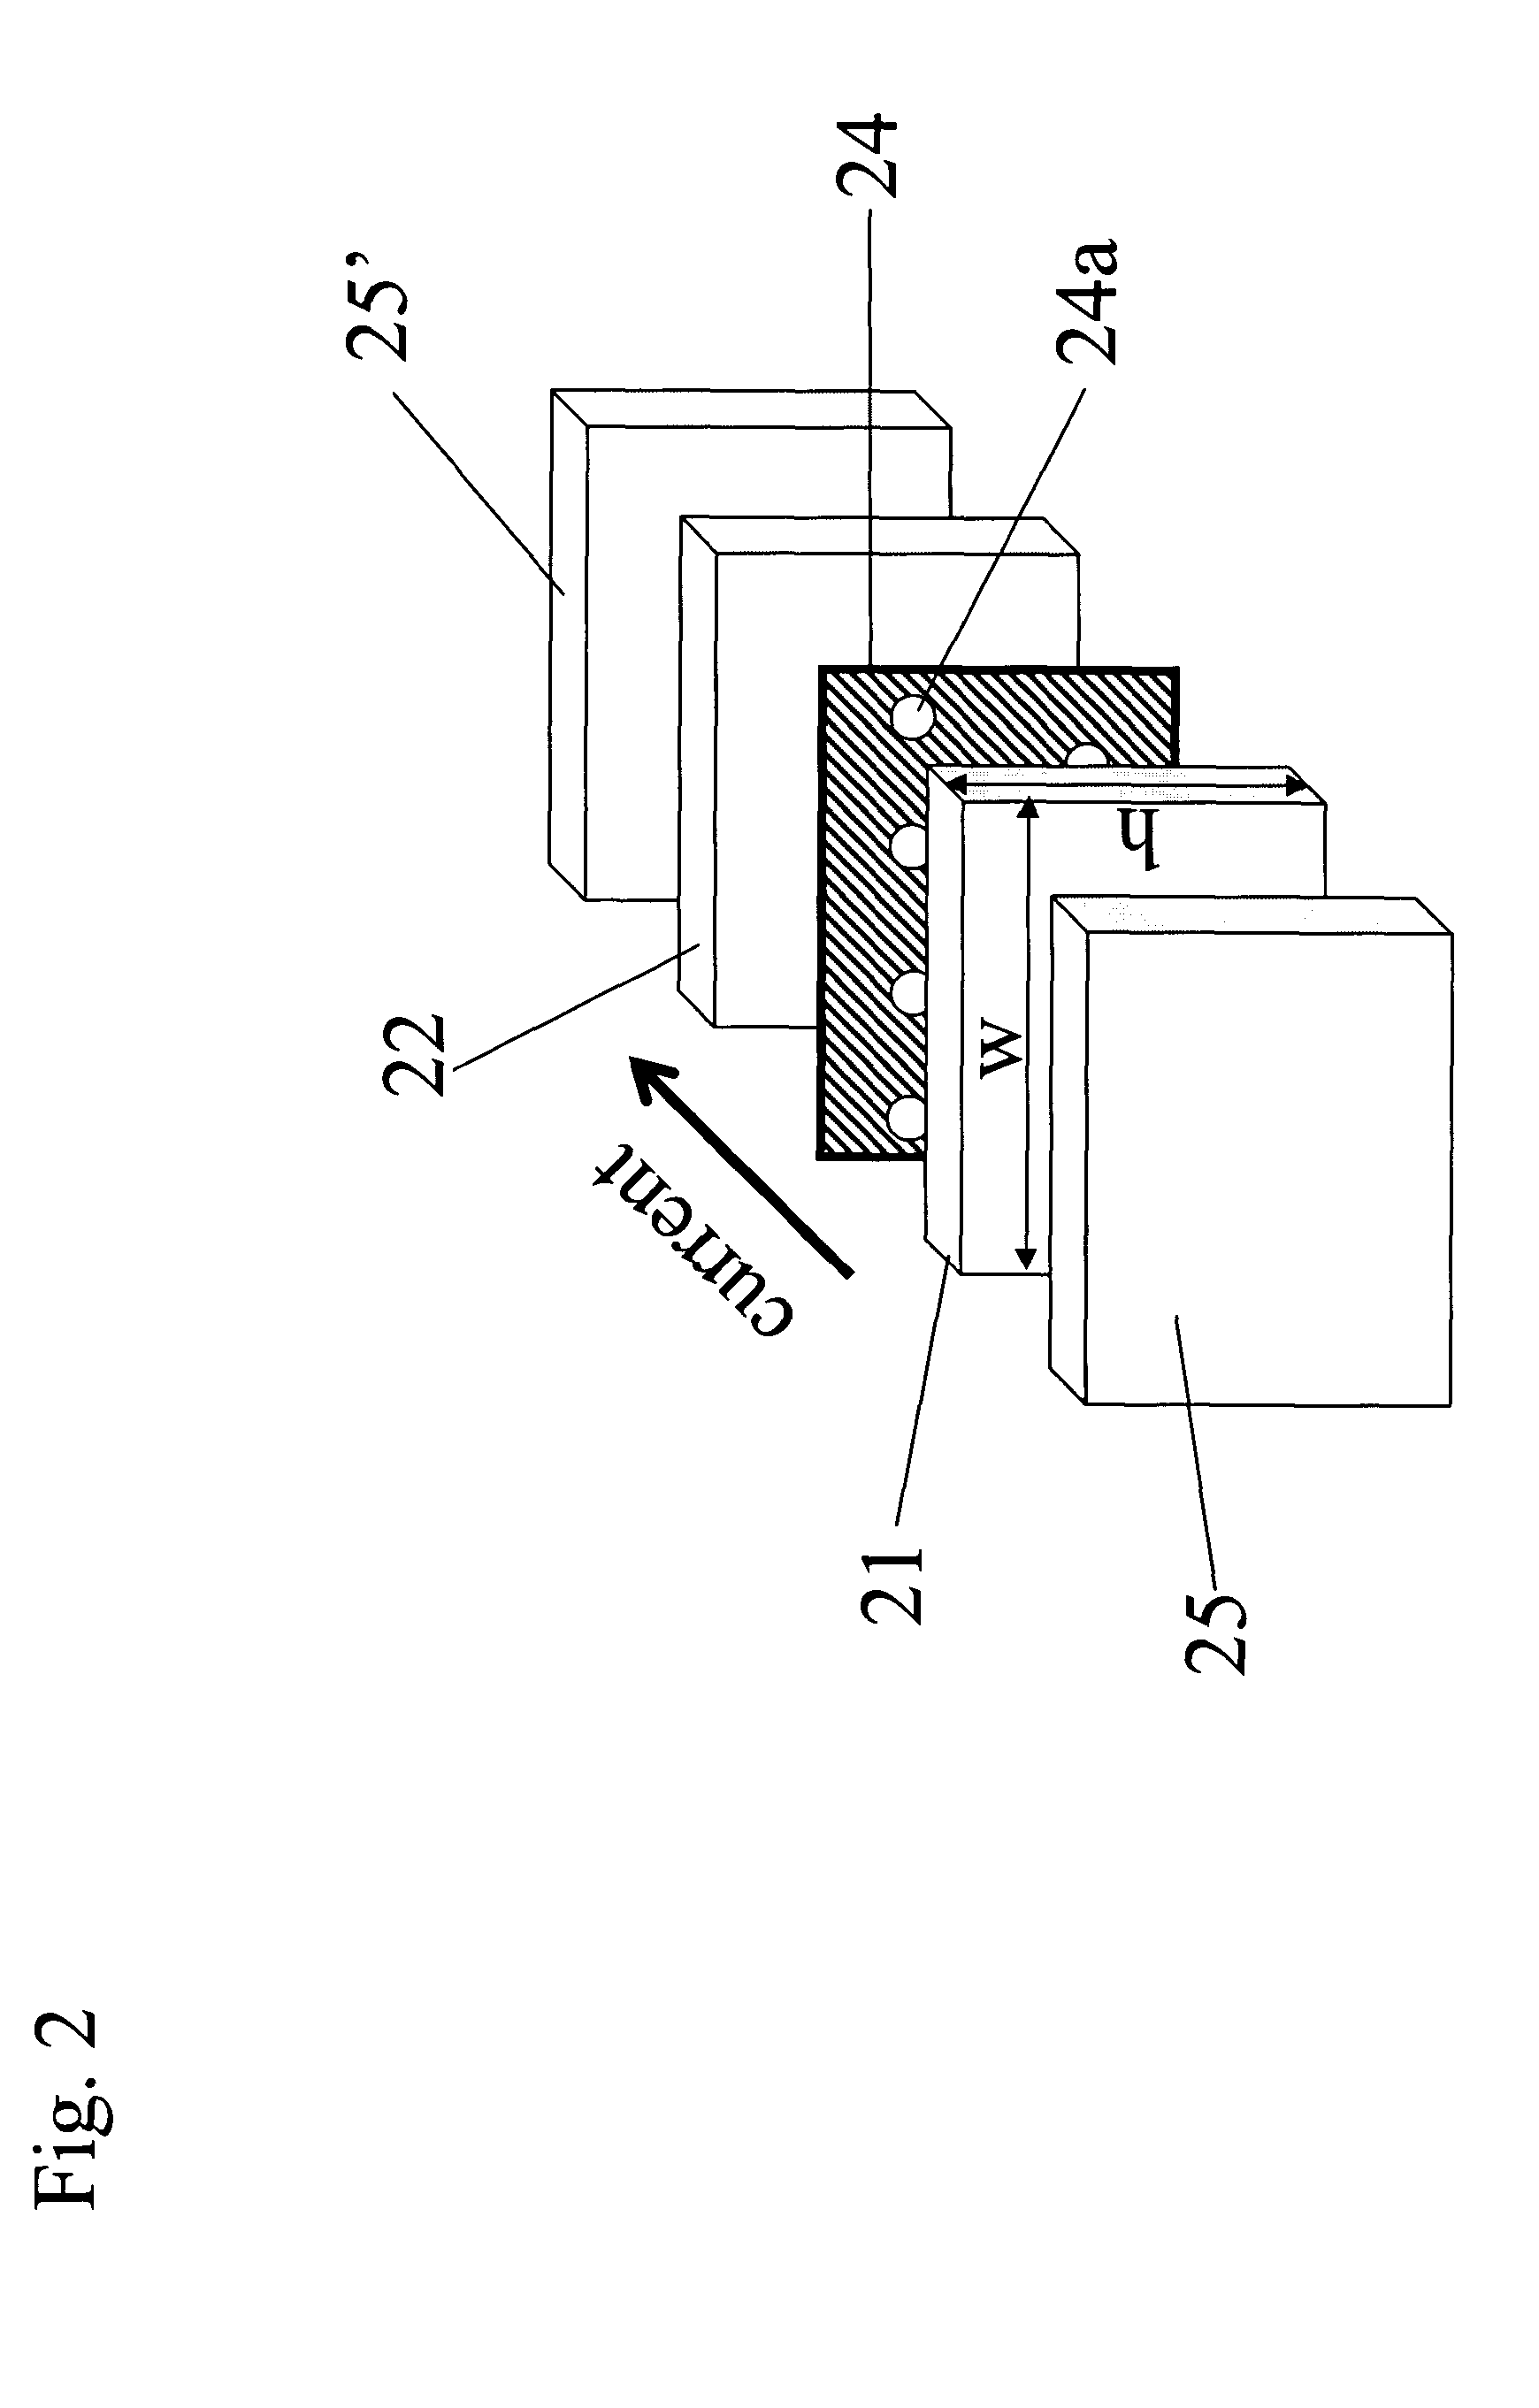 CPP spin-valve element